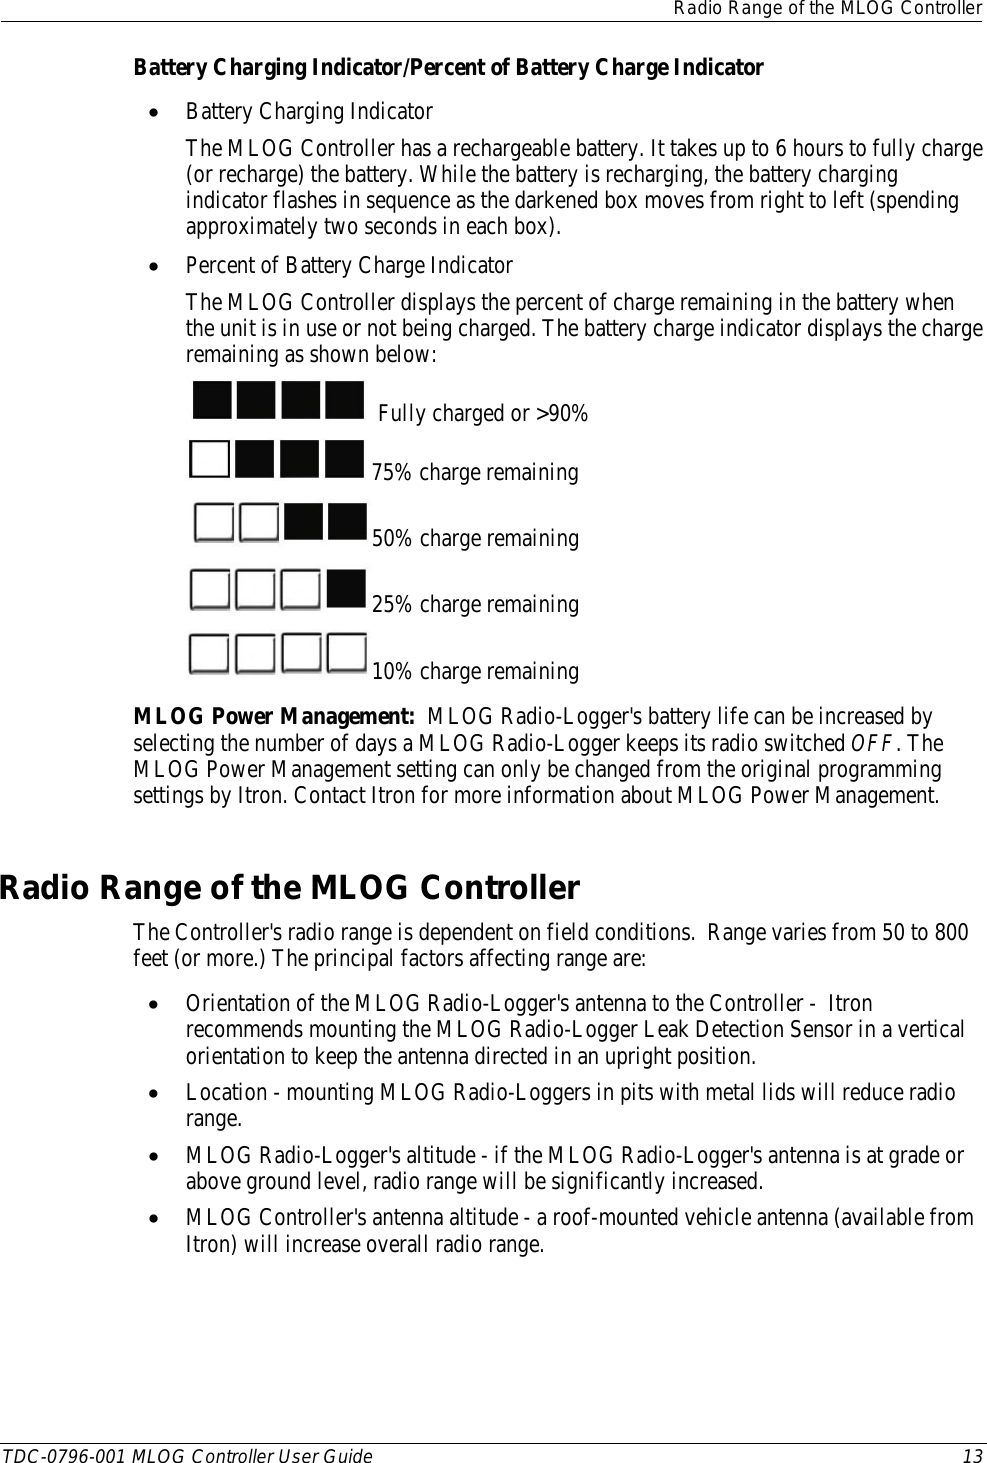  Radio Range of the MLOG Controller  TDC-0796-001 MLOG Controller User Guide 13  Battery Charging Indicator/Percent of Battery Charge Indicator • Battery Charging Indicator The MLOG Controller has a rechargeable battery. It takes up to 6 hours to fully charge (or recharge) the battery. While the battery is recharging, the battery charging indicator flashes in sequence as the darkened box moves from right to left (spending approximately two seconds in each box). • Percent of Battery Charge Indicator The MLOG Controller displays the percent of charge remaining in the battery when the unit is in use or not being charged. The battery charge indicator displays the charge remaining as shown below:    Fully charged or &gt;90%  75% charge remaining 50% charge remaining 25% charge remaining 10% charge remaining MLOG Power Management:  MLOG Radio-Logger&apos;s battery life can be increased by selecting the number of days a MLOG Radio-Logger keeps its radio switched OFF. The MLOG Power Management setting can only be changed from the original programming settings by Itron. Contact Itron for more information about MLOG Power Management.      Radio Range of the MLOG Controller The Controller&apos;s radio range is dependent on field conditions.  Range varies from 50 to 800 feet (or more.) The principal factors affecting range are: • Orientation of the MLOG Radio-Logger&apos;s antenna to the Controller -  Itron recommends mounting the MLOG Radio-Logger Leak Detection Sensor in a vertical orientation to keep the antenna directed in an upright position. • Location - mounting MLOG Radio-Loggers in pits with metal lids will reduce radio range. • MLOG Radio-Logger&apos;s altitude - if the MLOG Radio-Logger&apos;s antenna is at grade or above ground level, radio range will be significantly increased. • MLOG Controller&apos;s antenna altitude - a roof-mounted vehicle antenna (available from Itron) will increase overall radio range.   